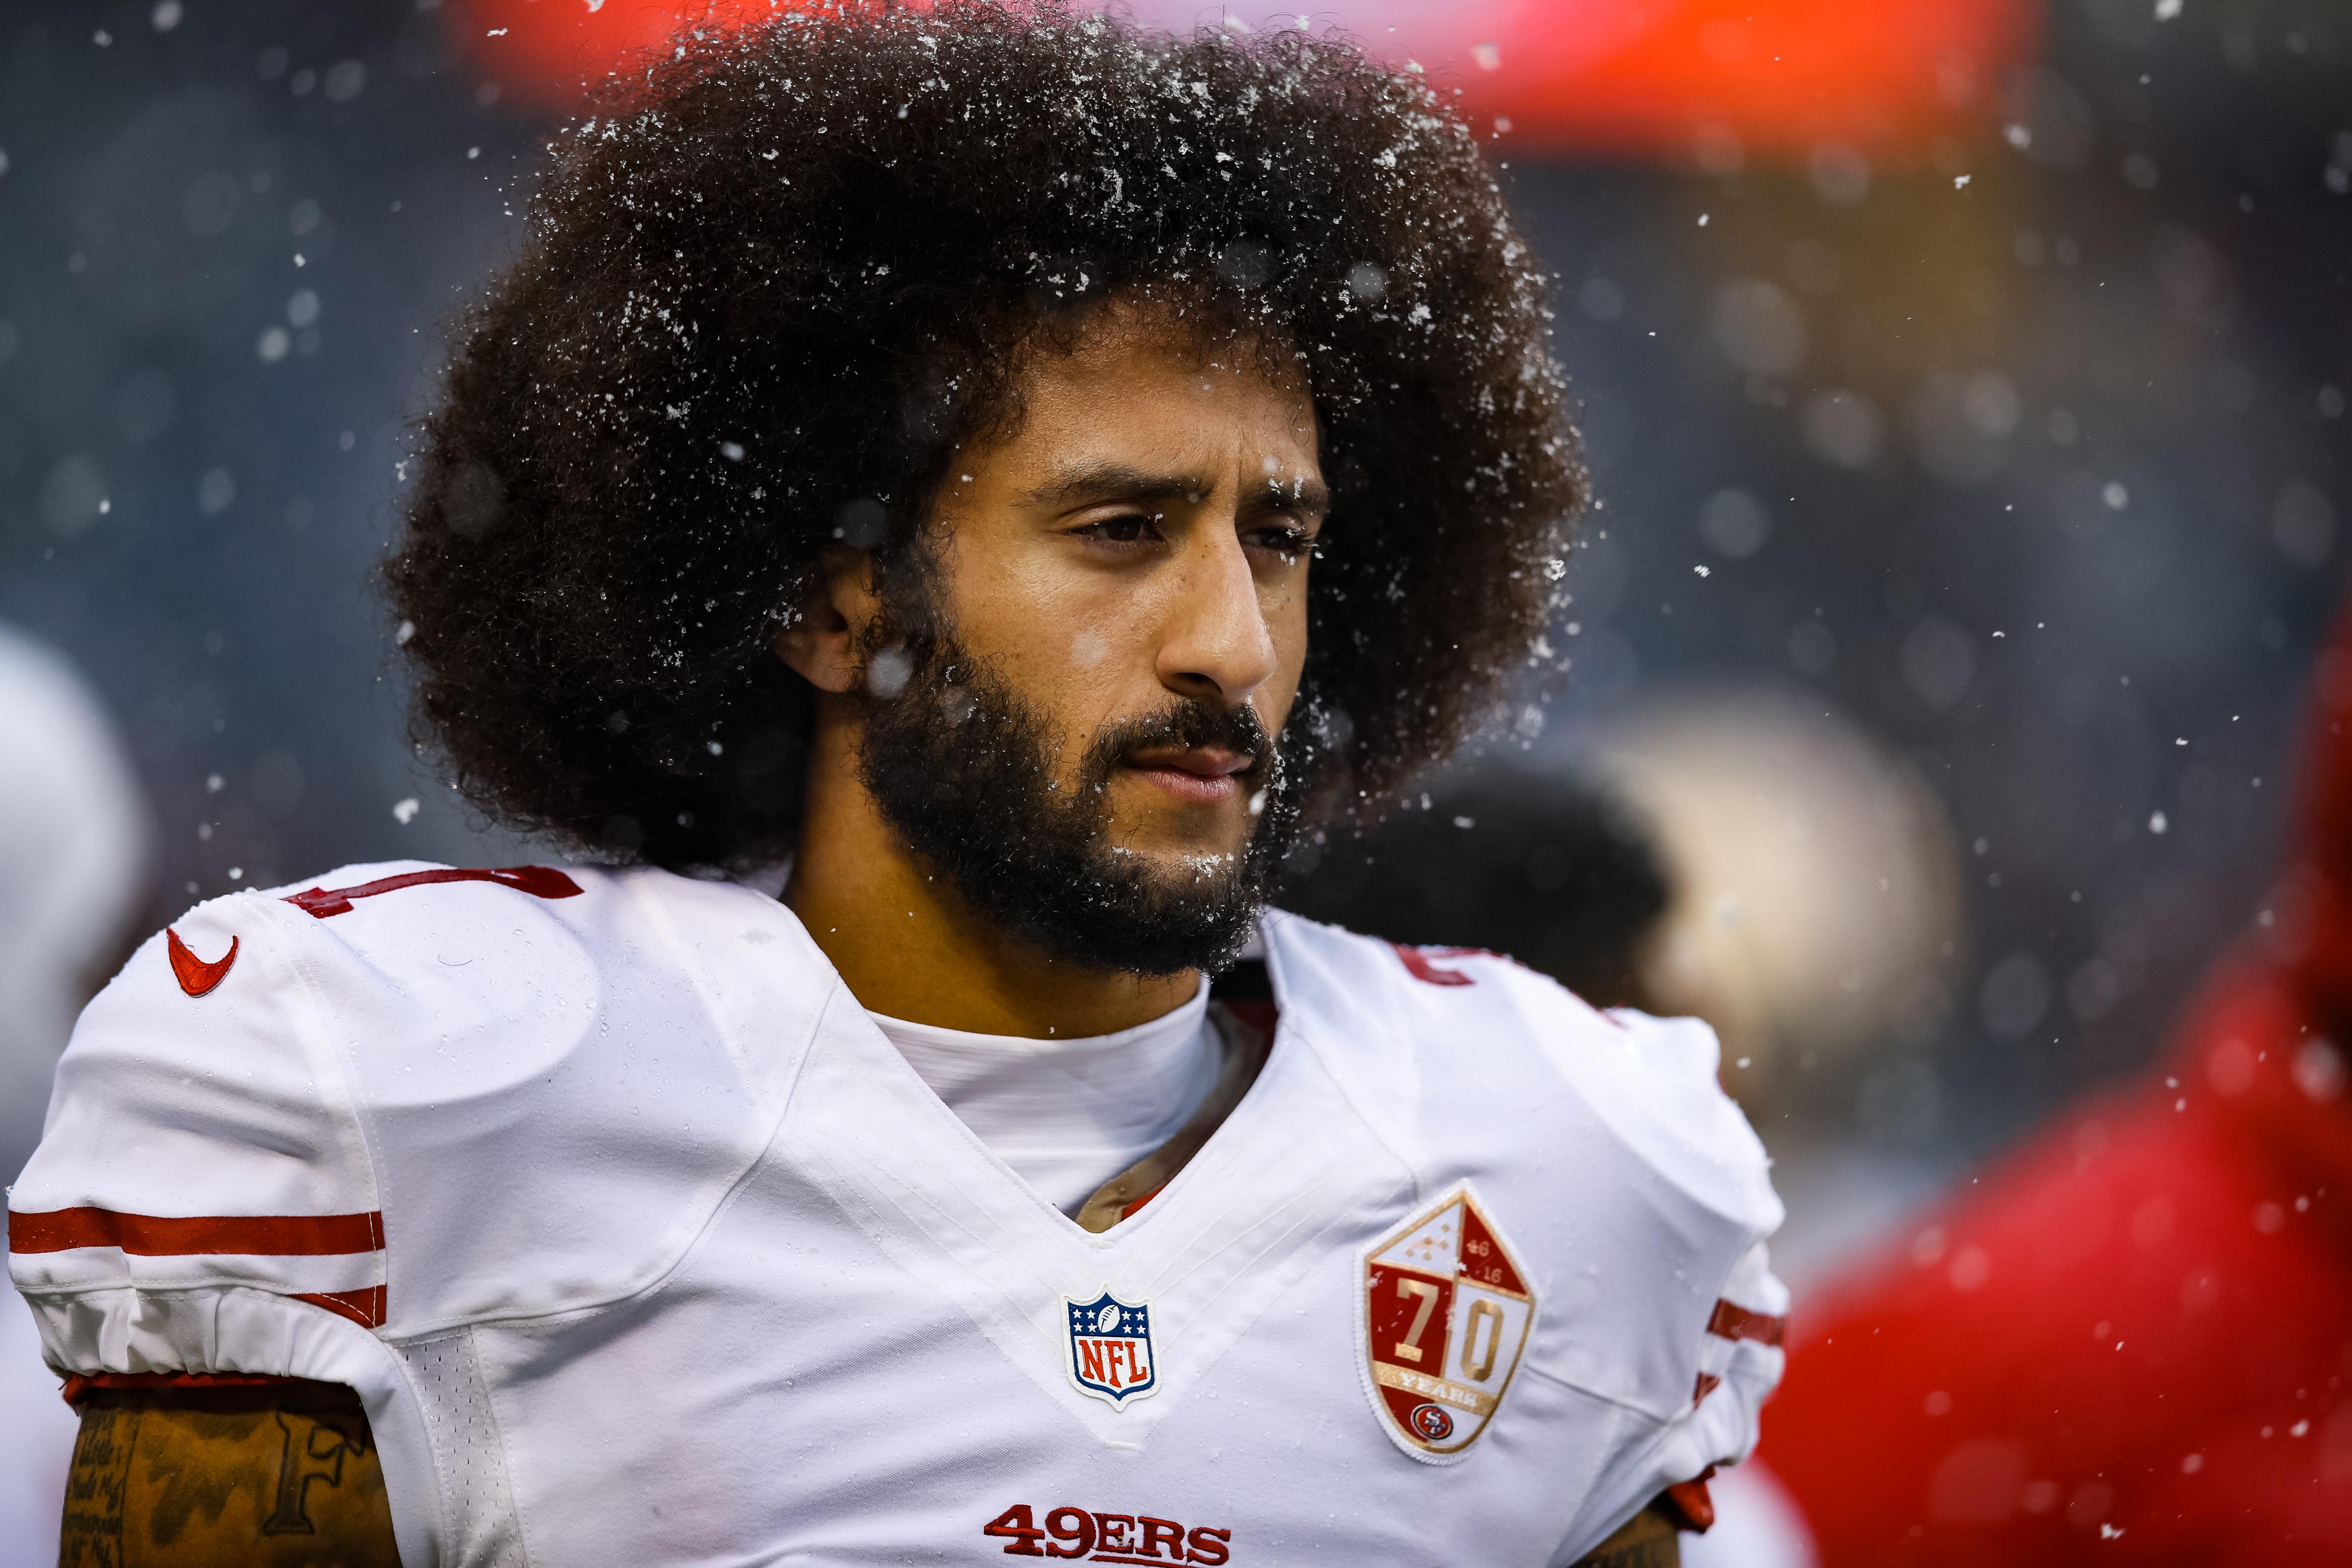 Colin Kaepernick in his San Francisco 49ers uniform, with snow falling around him.